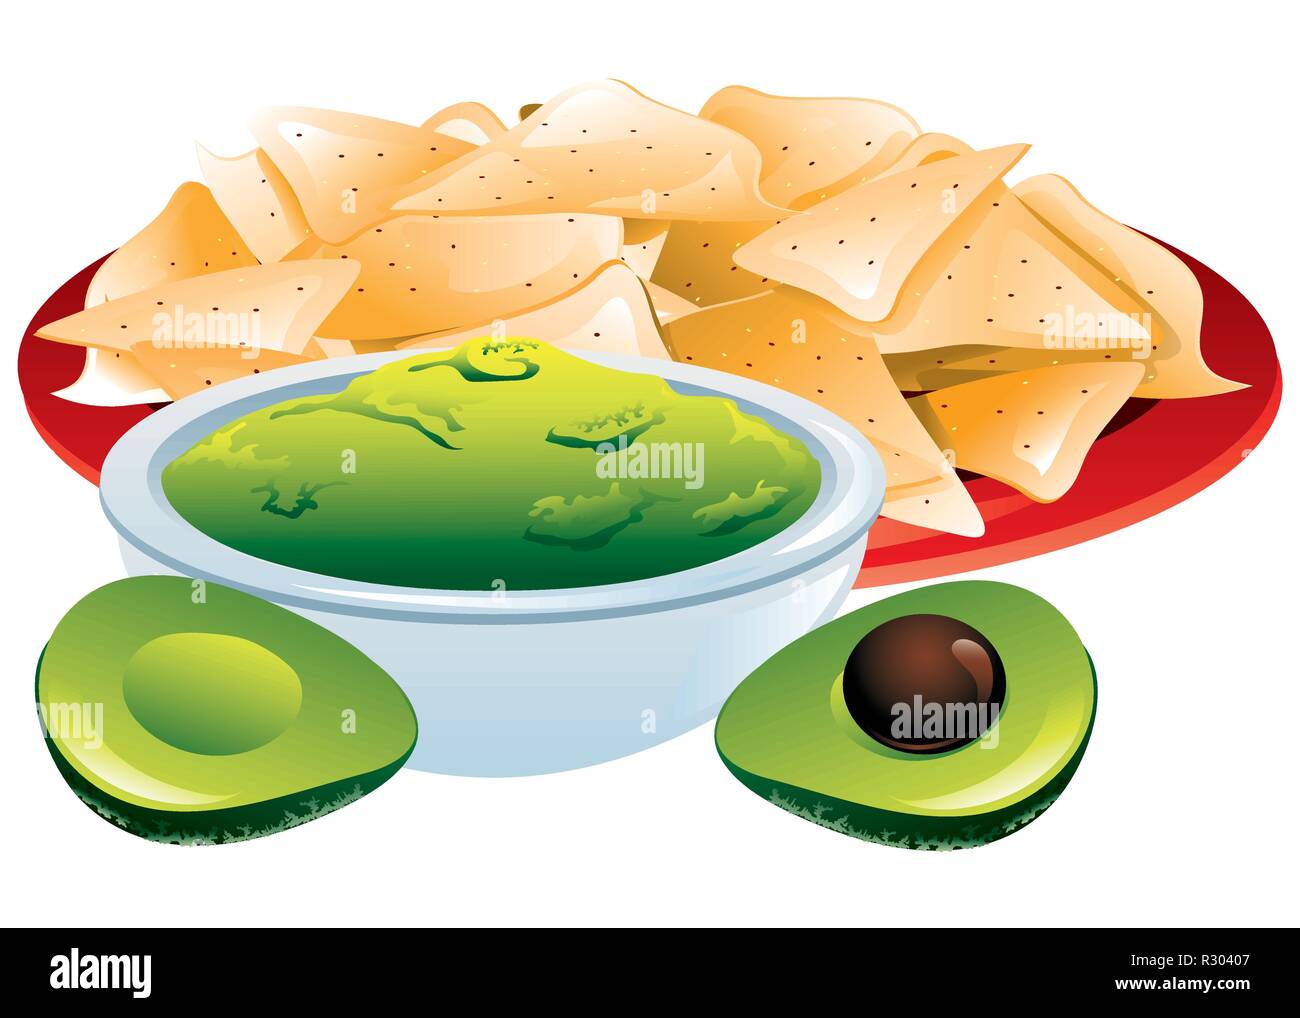 Illustration of chips and guacamole dip Stock Vector